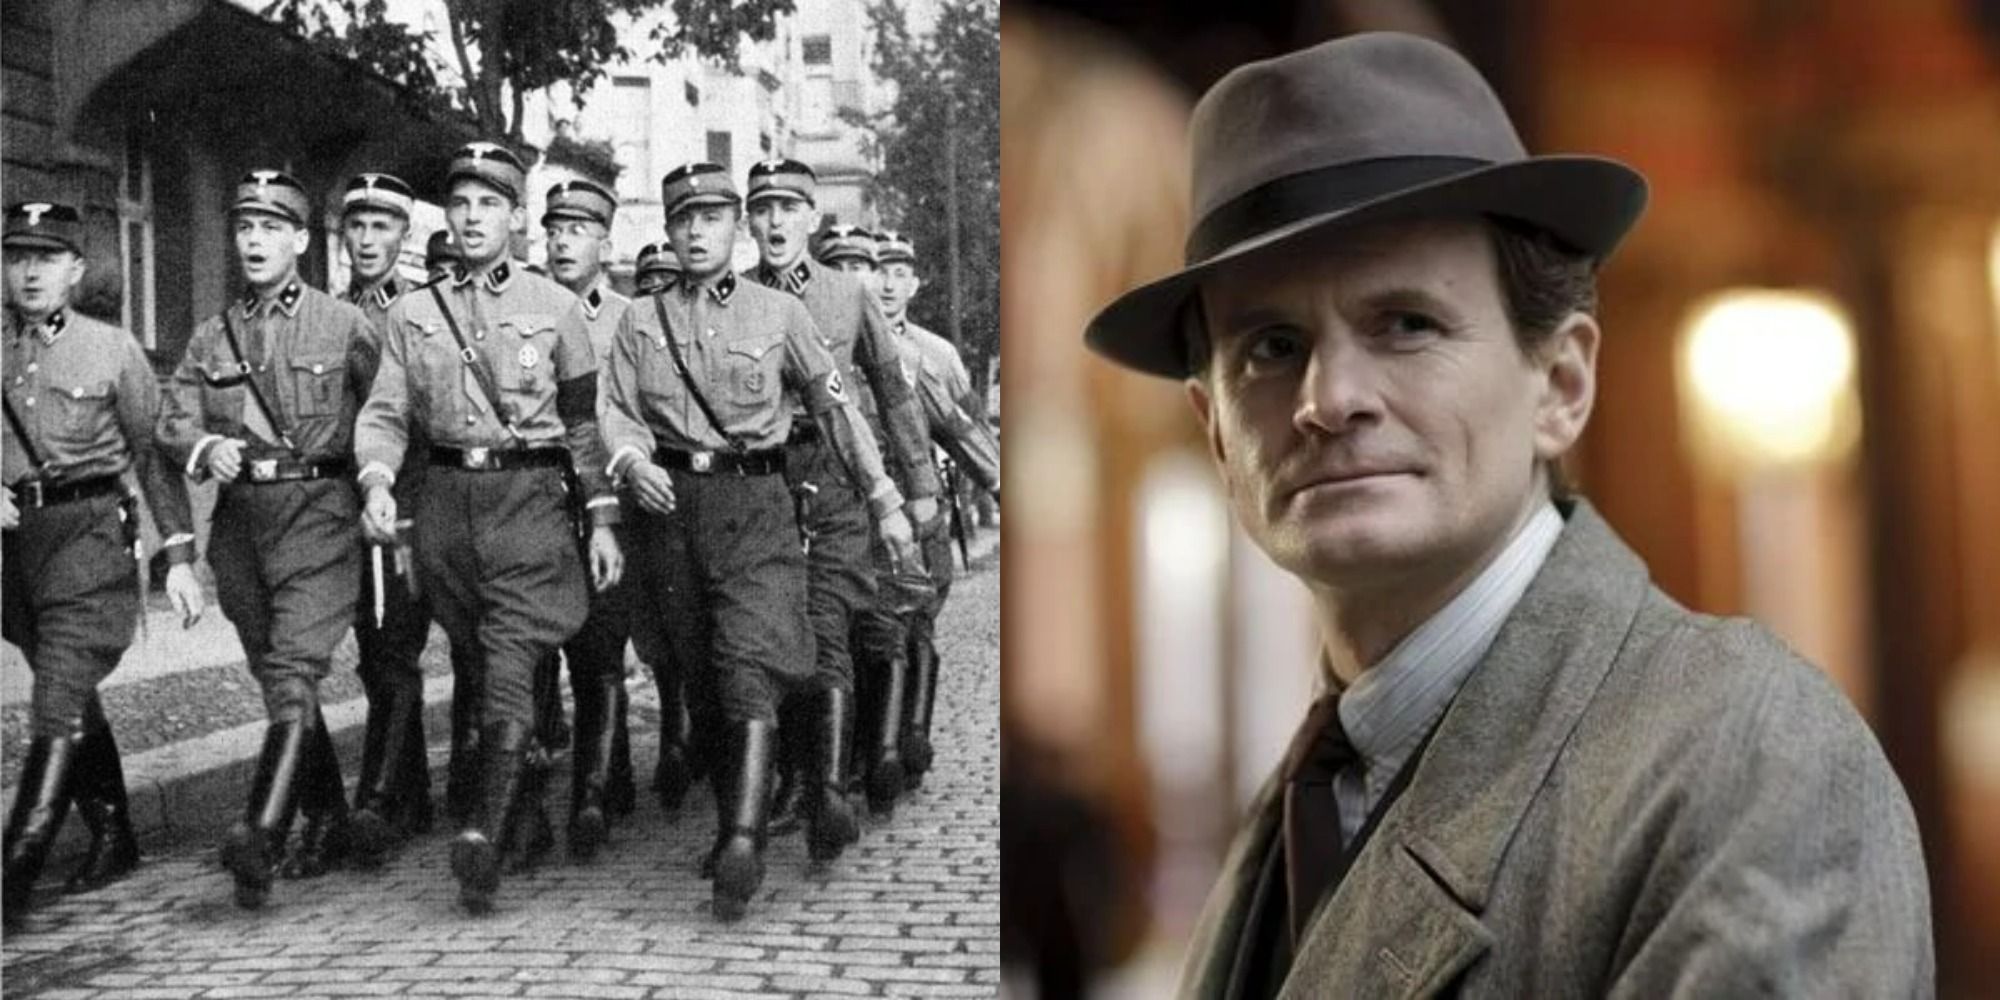 The Beer Hall Putsch on 'Downton Abbey'